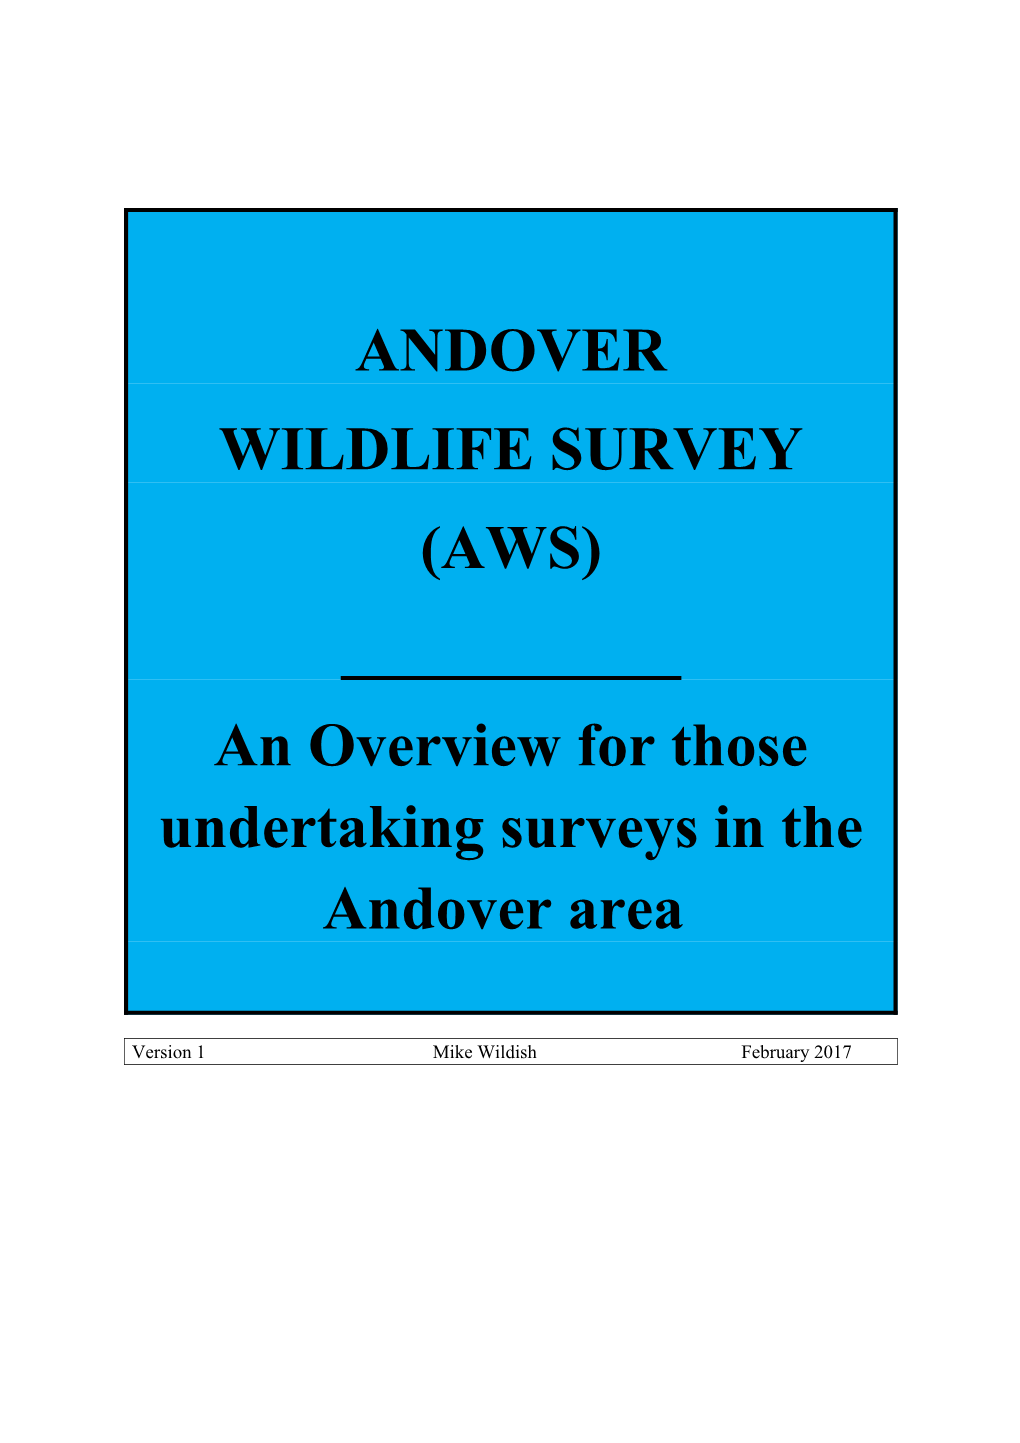 An Overview for Those Undertaking Surveys in the Andover Area